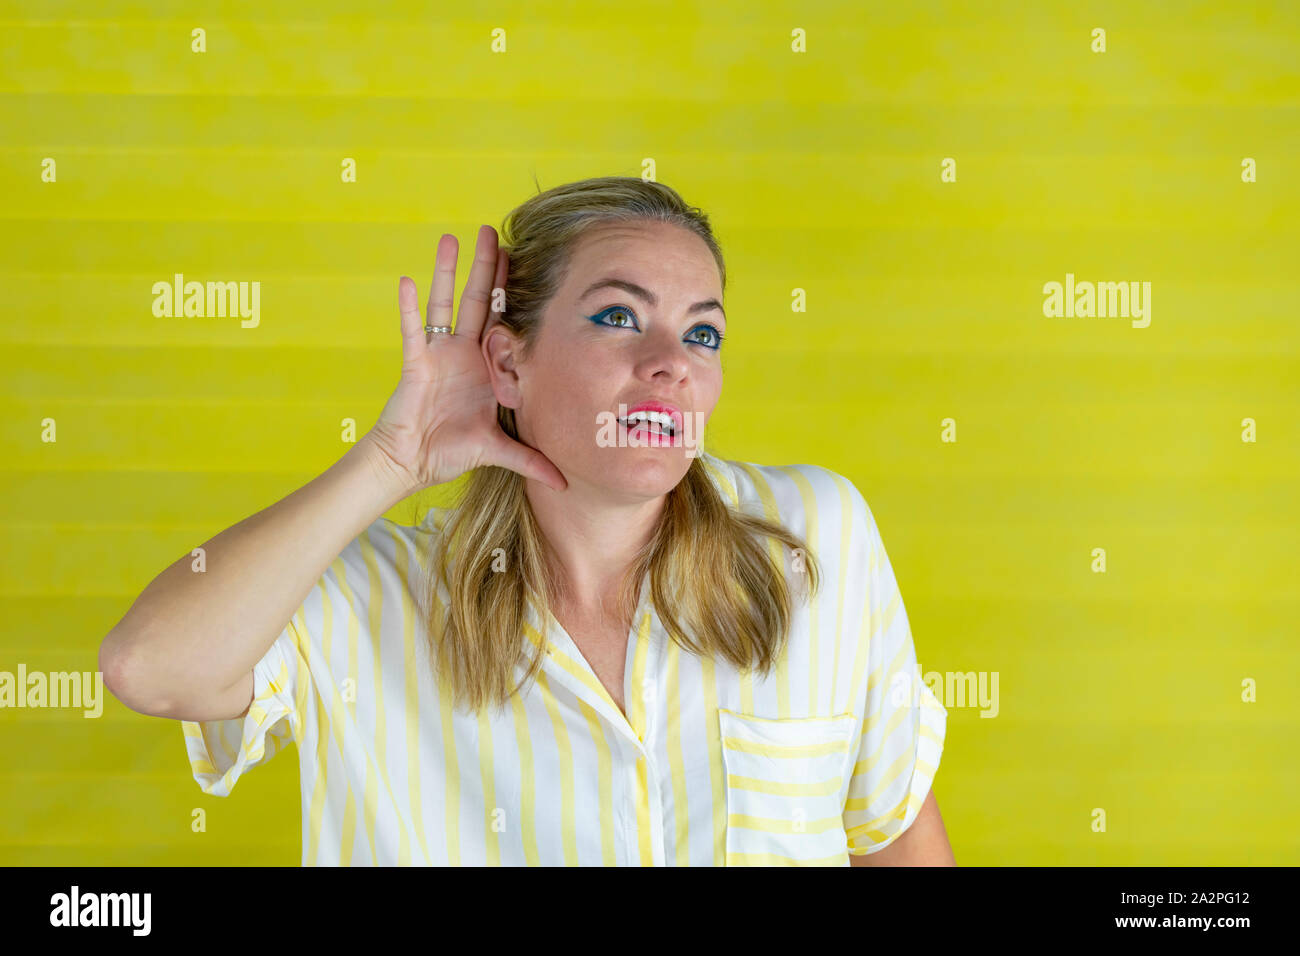 Young woman in fashionable striped shirt smiling with hand over ear listening . Concept of listening. - Image Stock Photo